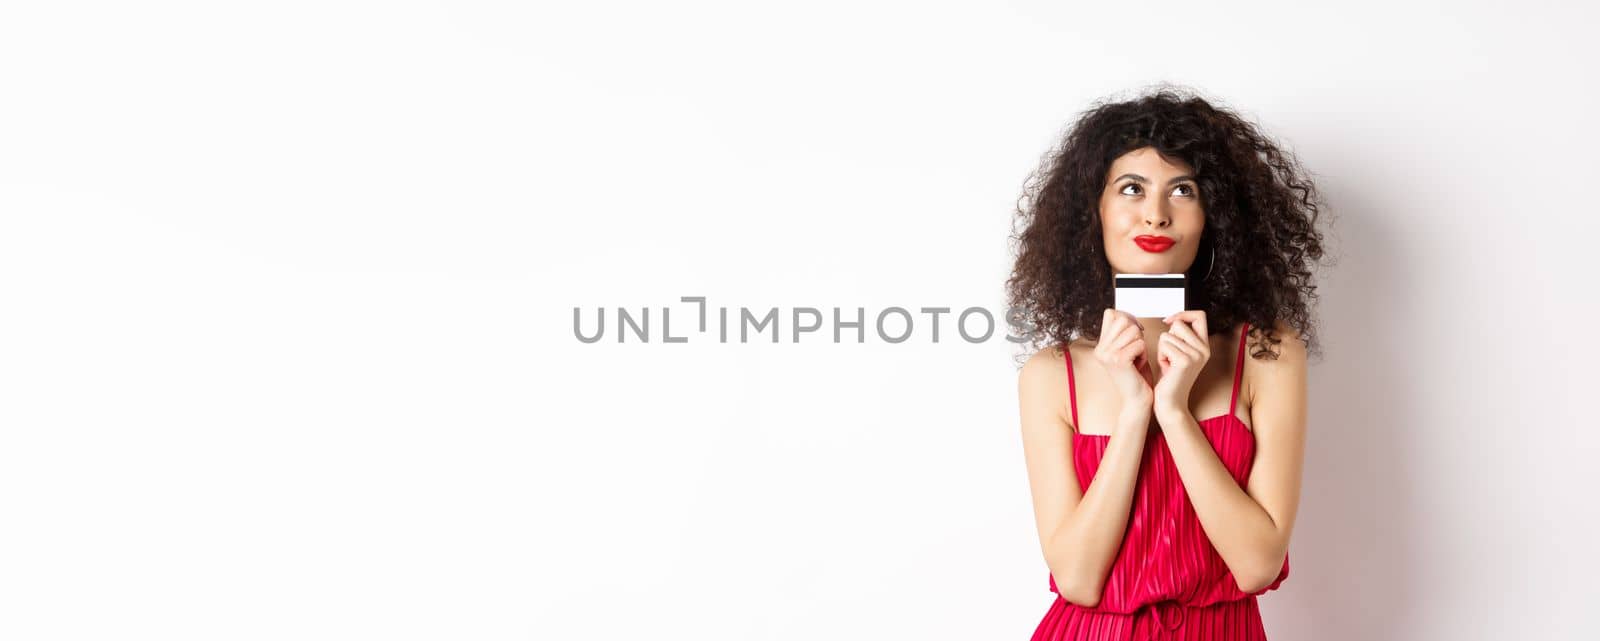 Silly young woman looking romantic, holding plastic credit card and thinking of shopping, standing over white background. Copy space